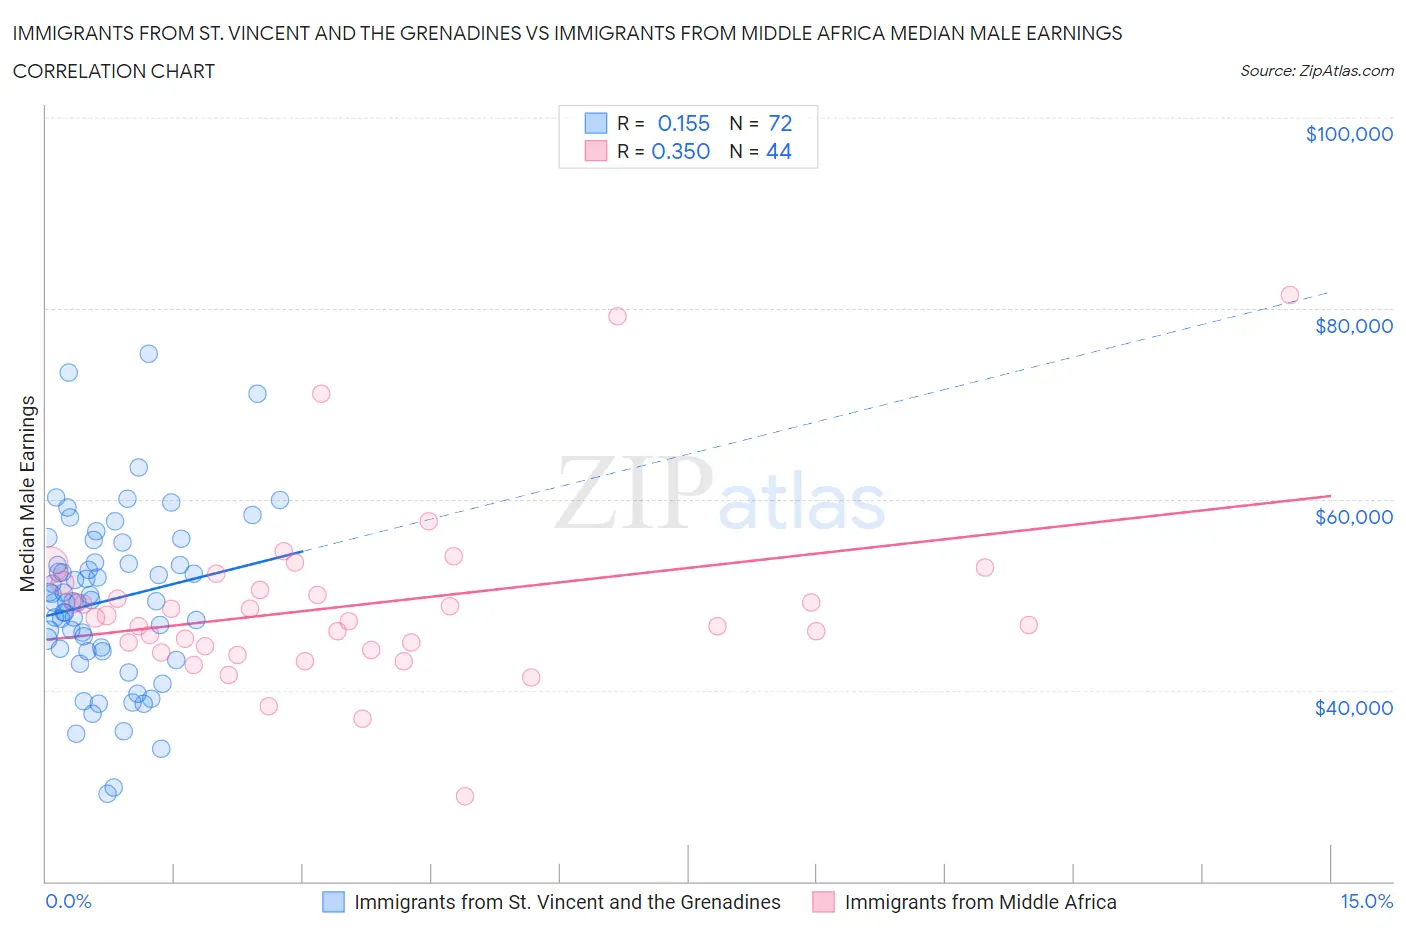 Immigrants from St. Vincent and the Grenadines vs Immigrants from Middle Africa Median Male Earnings